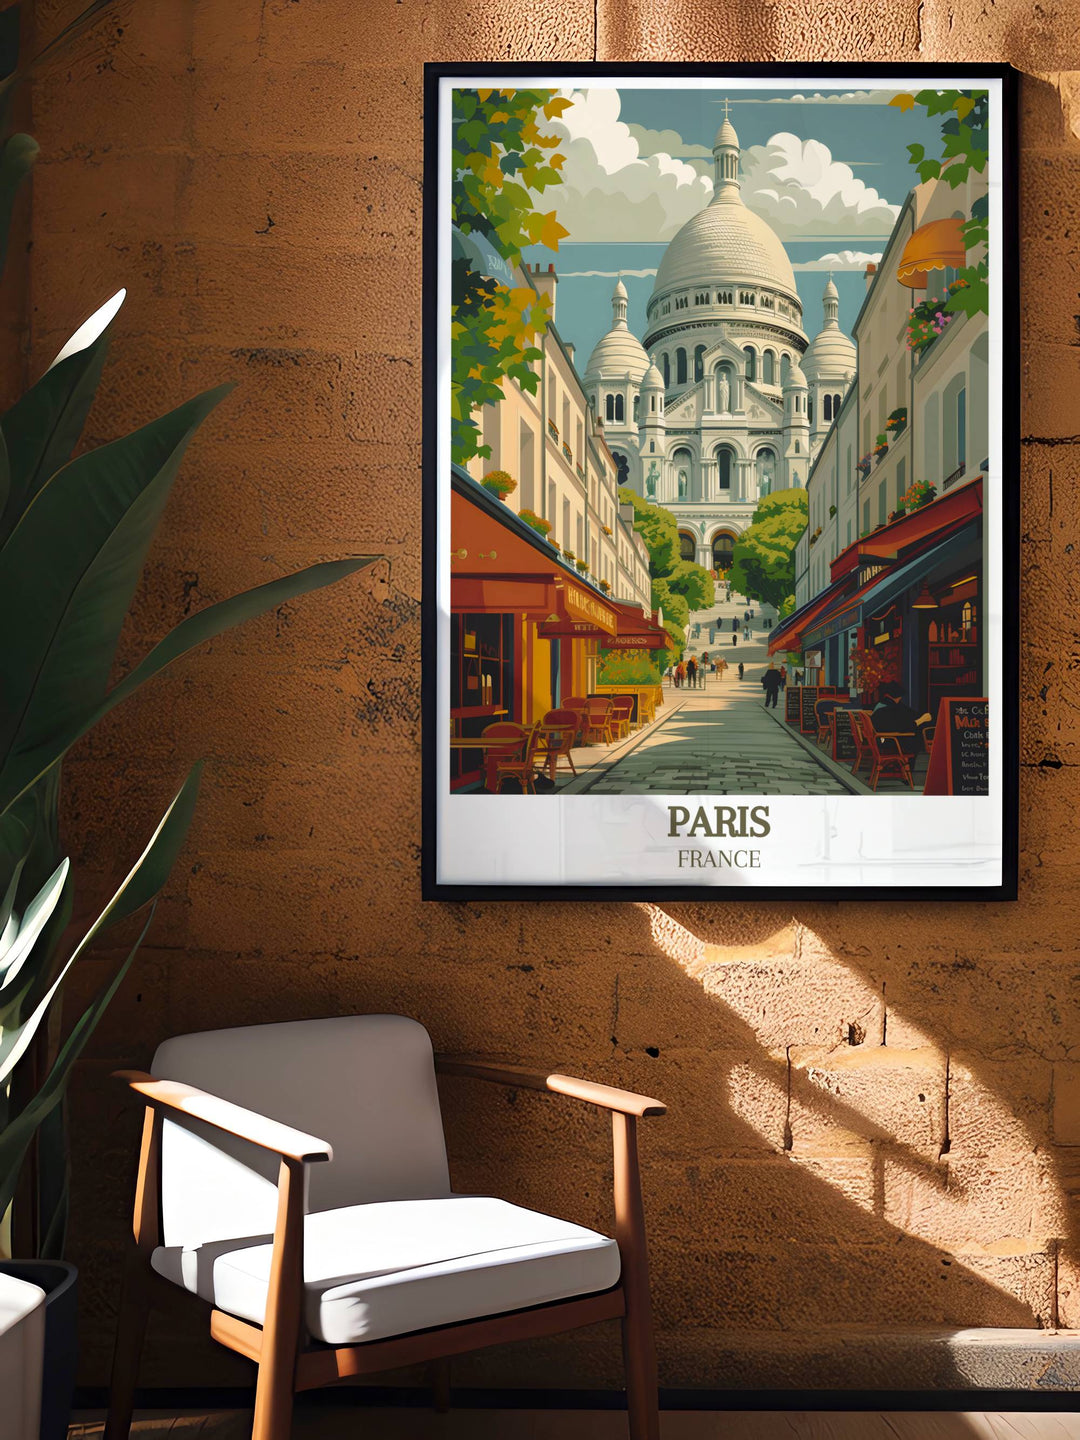 France framed art prints, highlighting the beauty and charm of Montmartre, from its historic buildings to its lively street scenes, perfect for adding a touch of French elegance to your home decor.